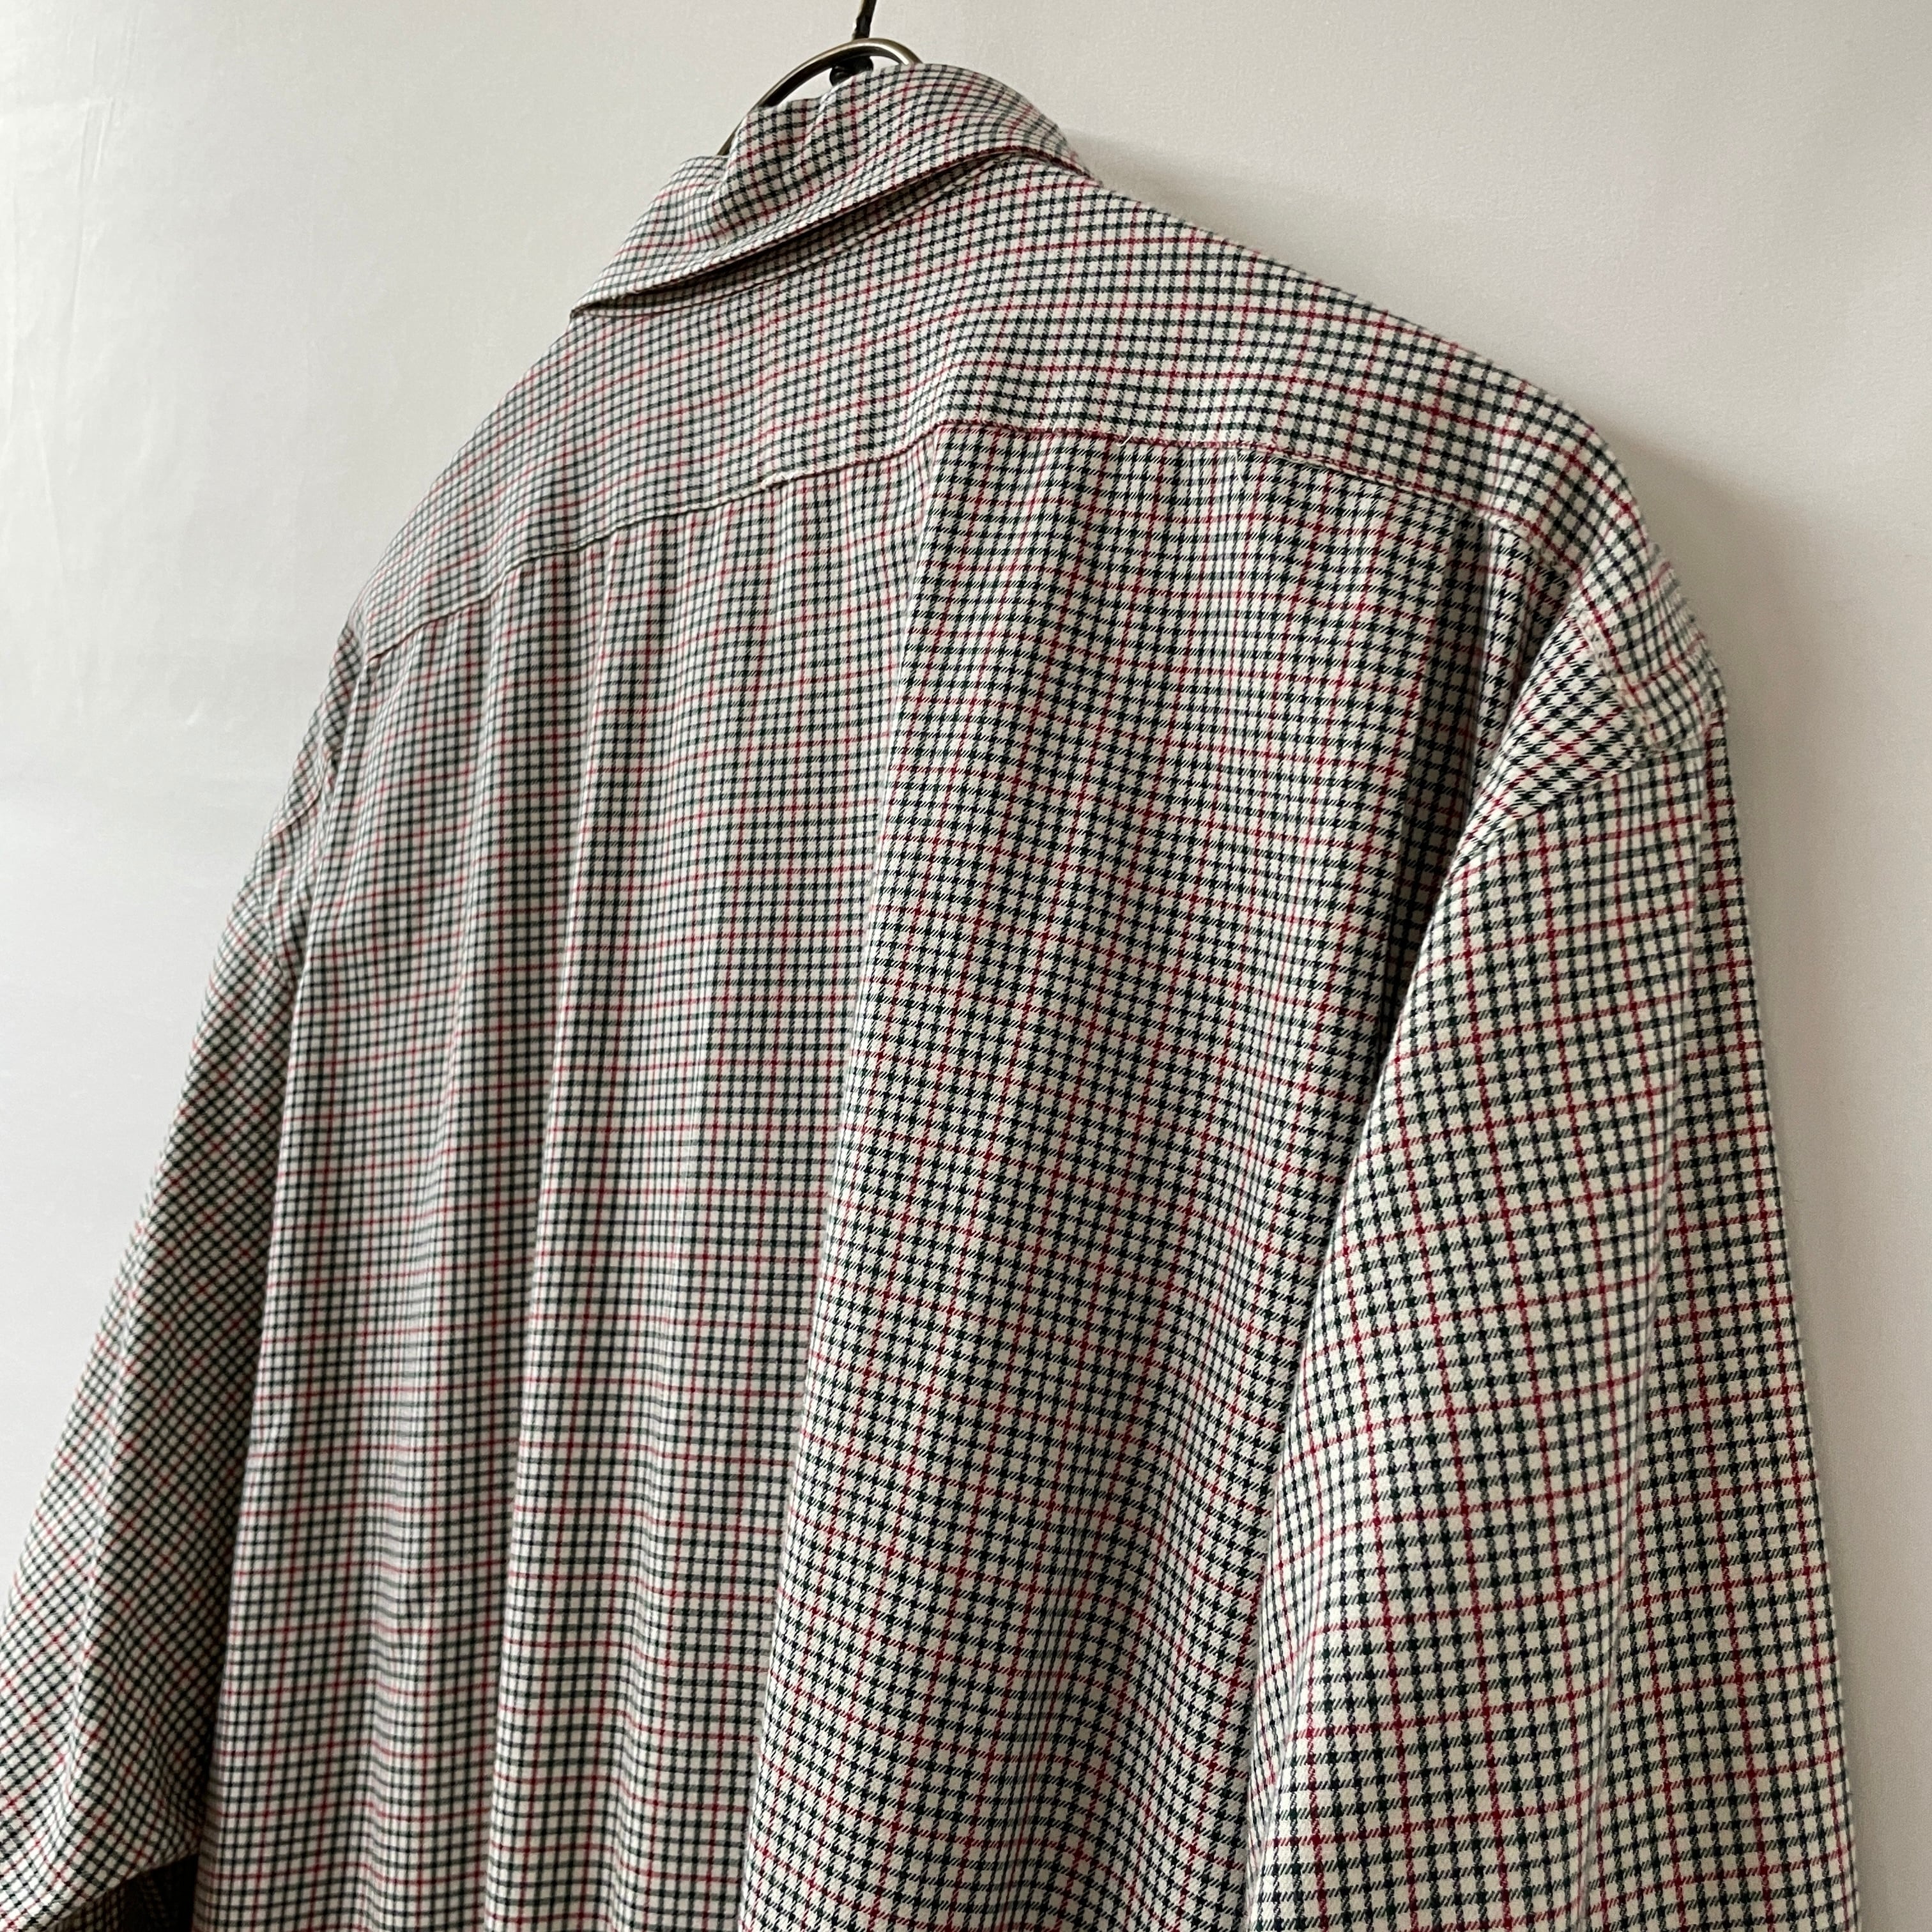 POLO BY Ralph Lauren STANTON CLASSIC FIT Shirt シャツ チェック